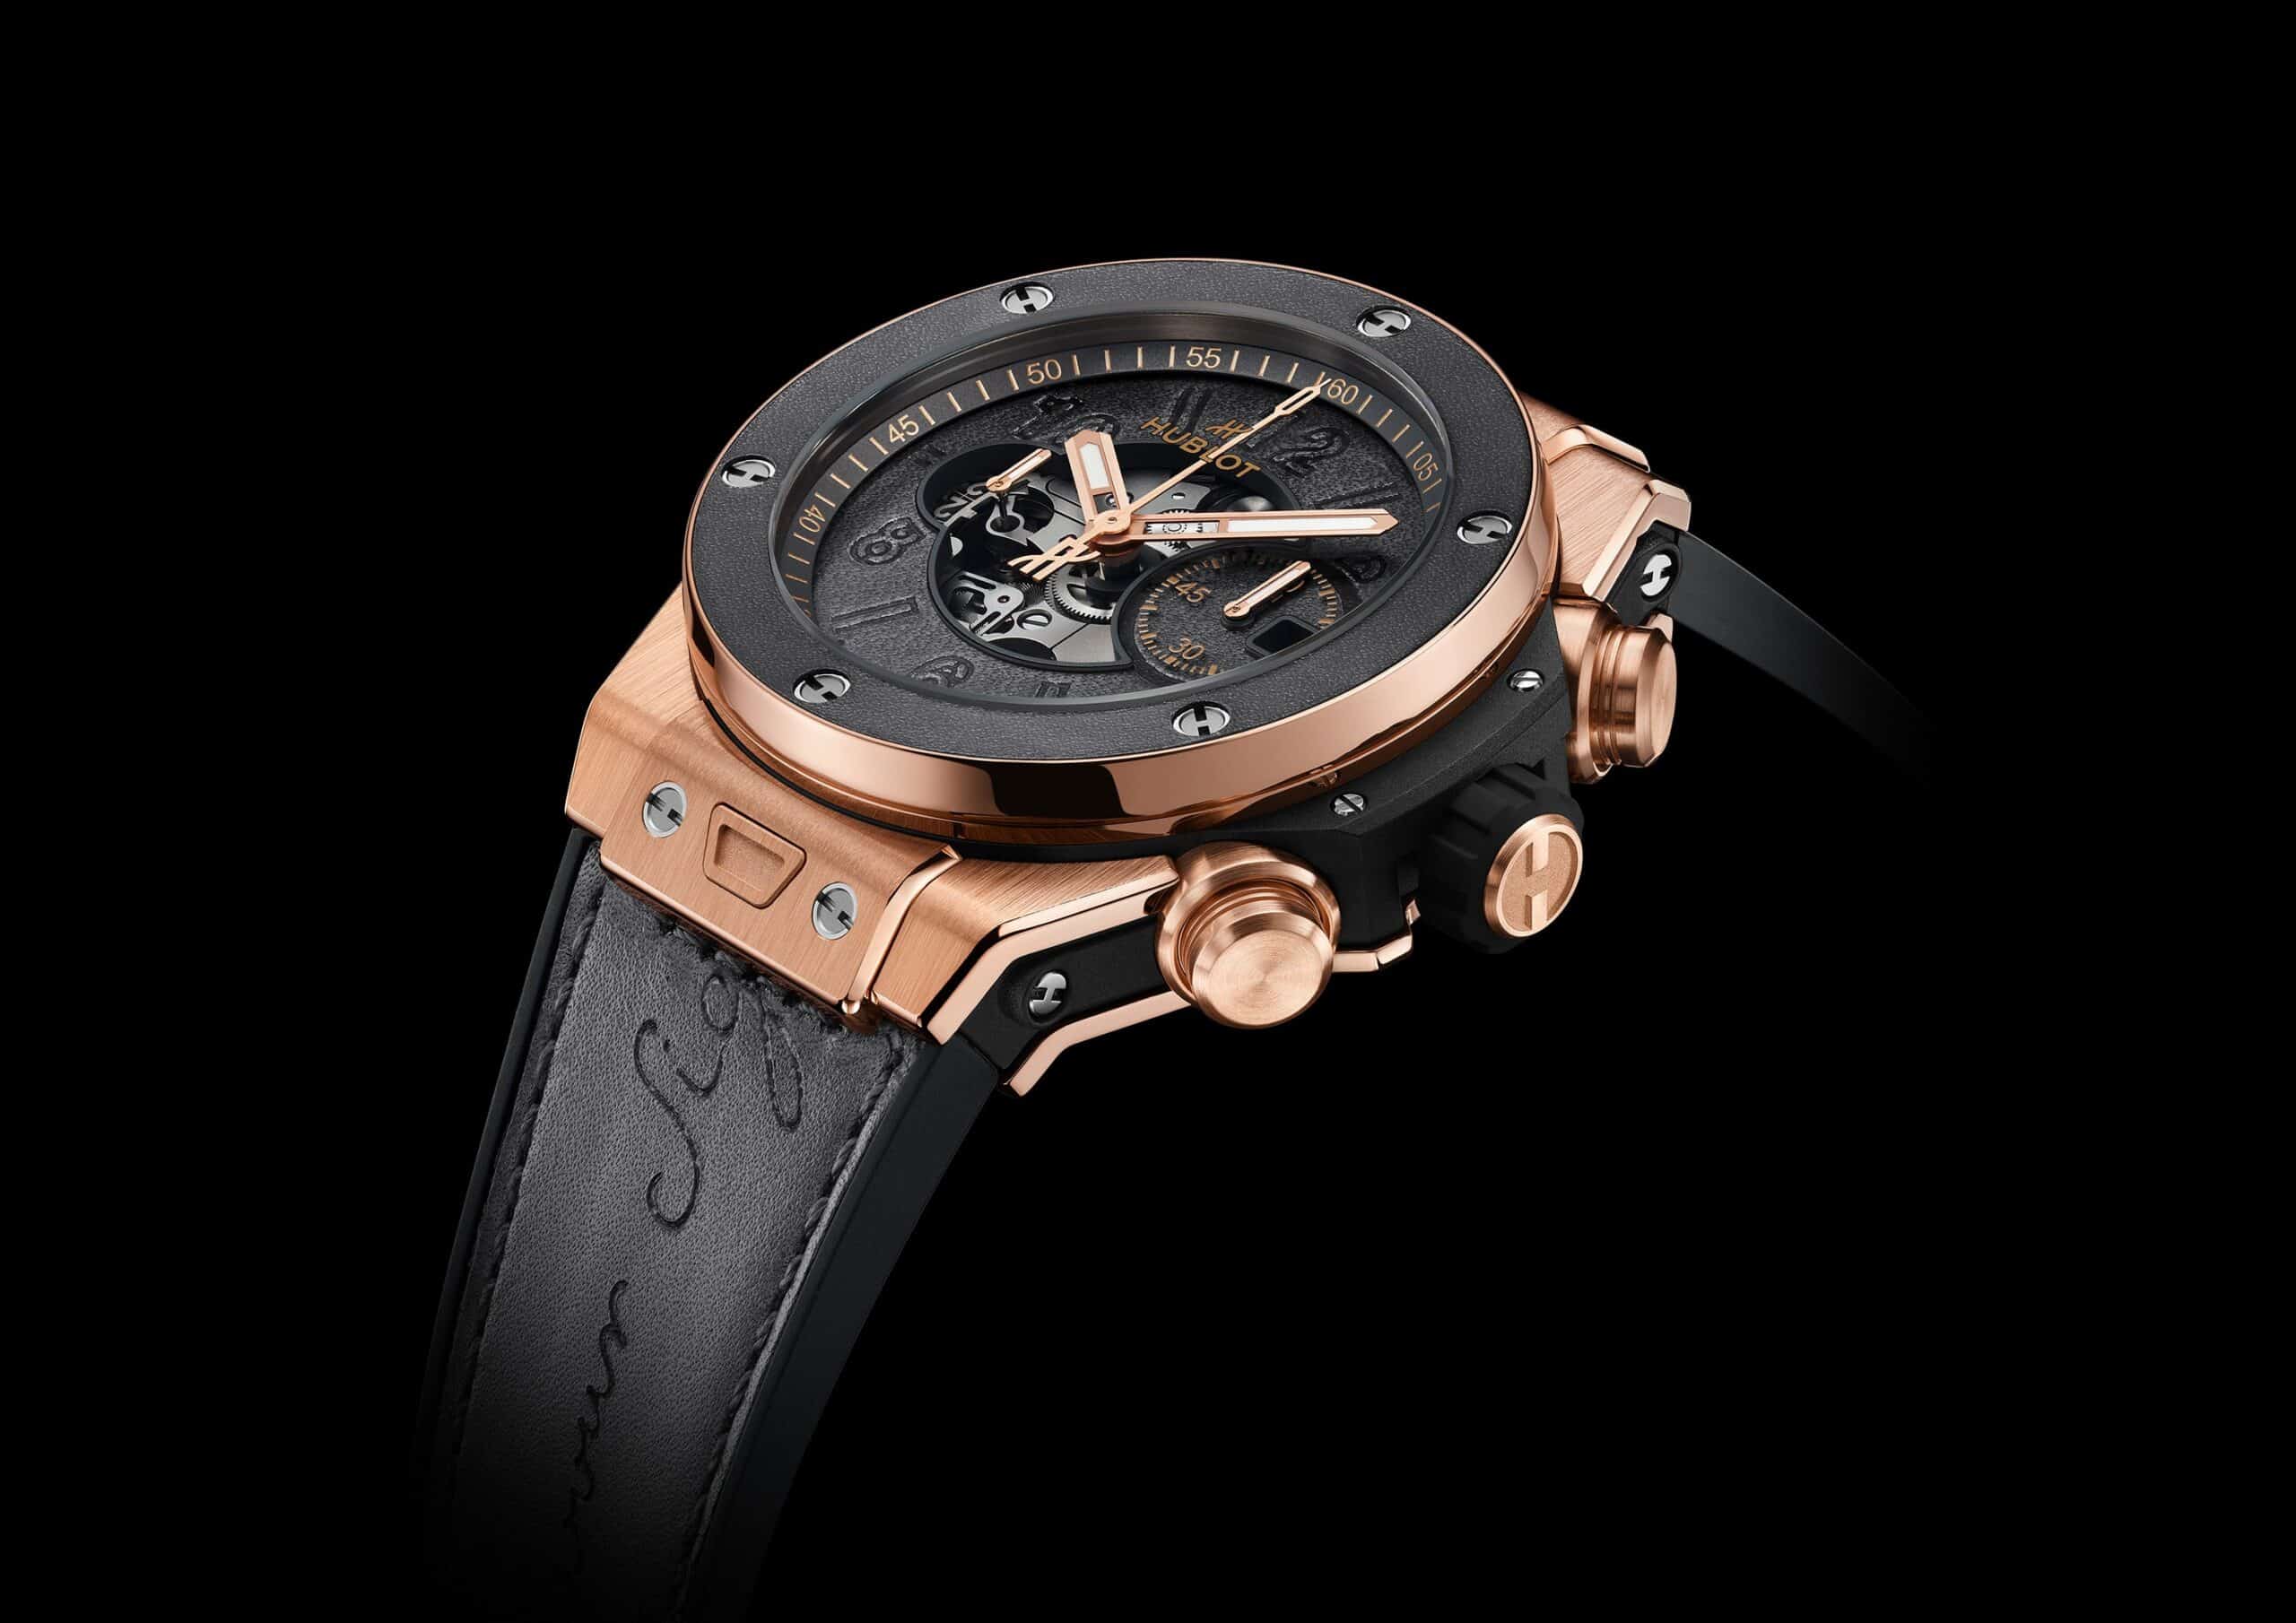 Likely to sell out? The latest work of the popular collaboration is limited to 50 pieces Japan! Hublot Big Bang Unico Berluti Arminio King Gold – GQ New Watch